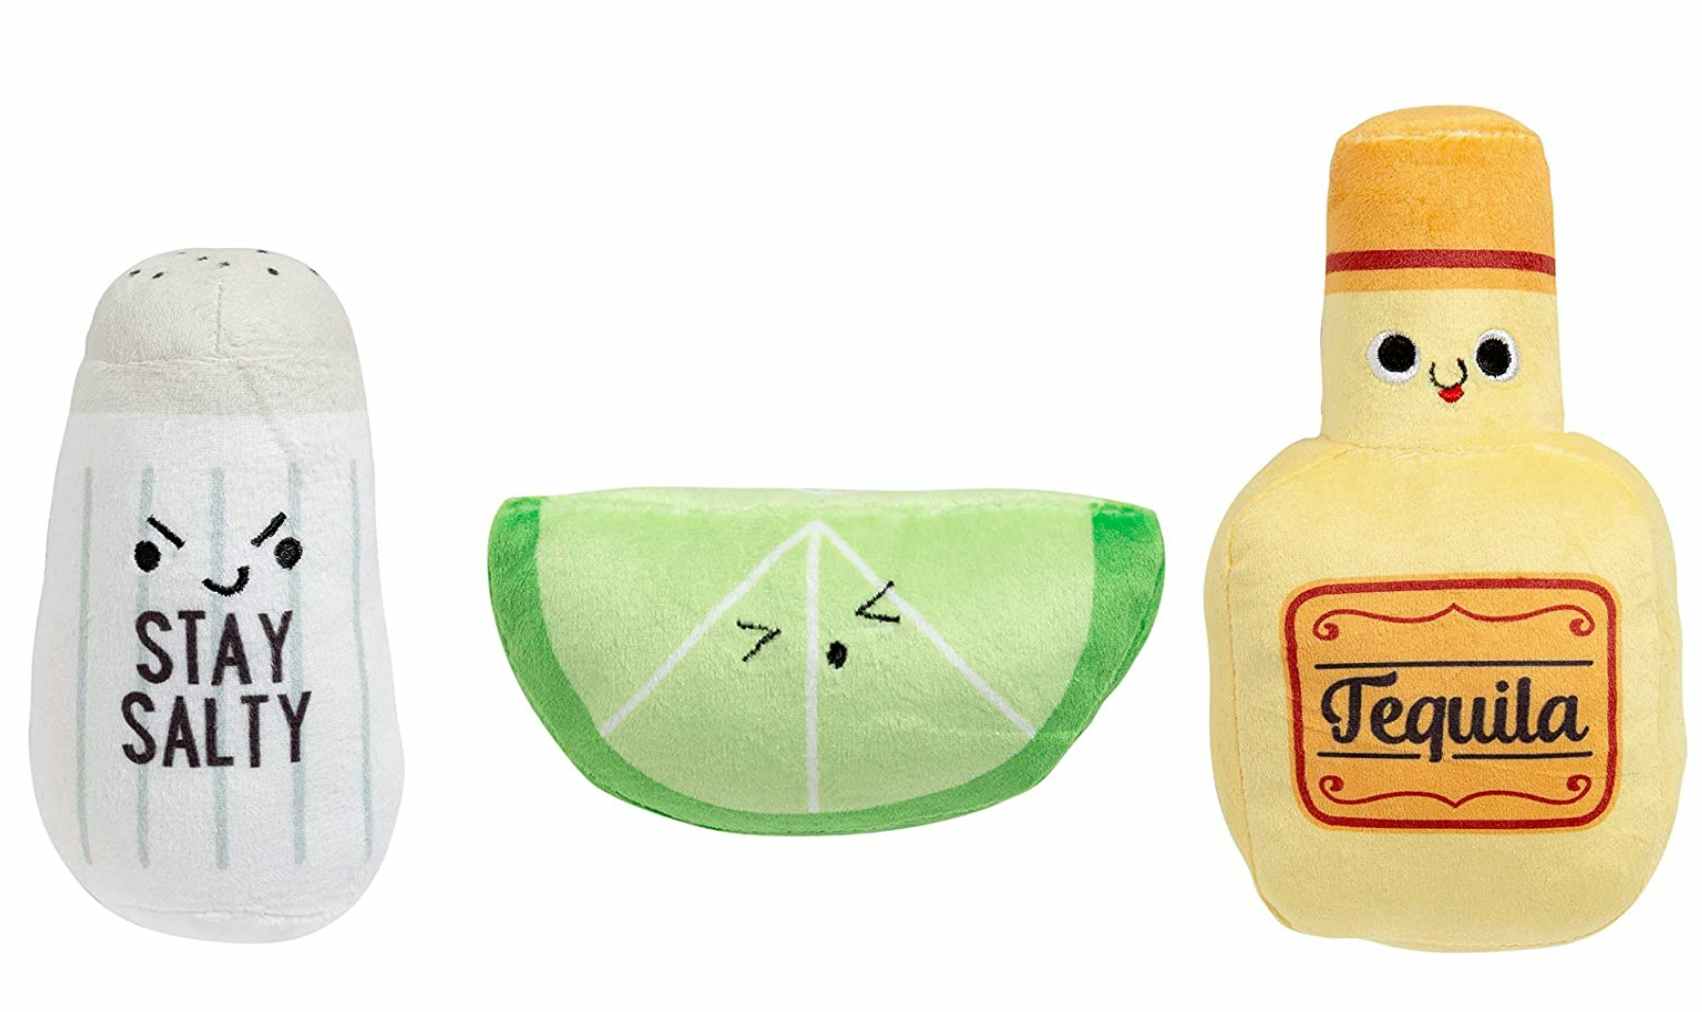 Salt shaker, lime, and tequila dog toys